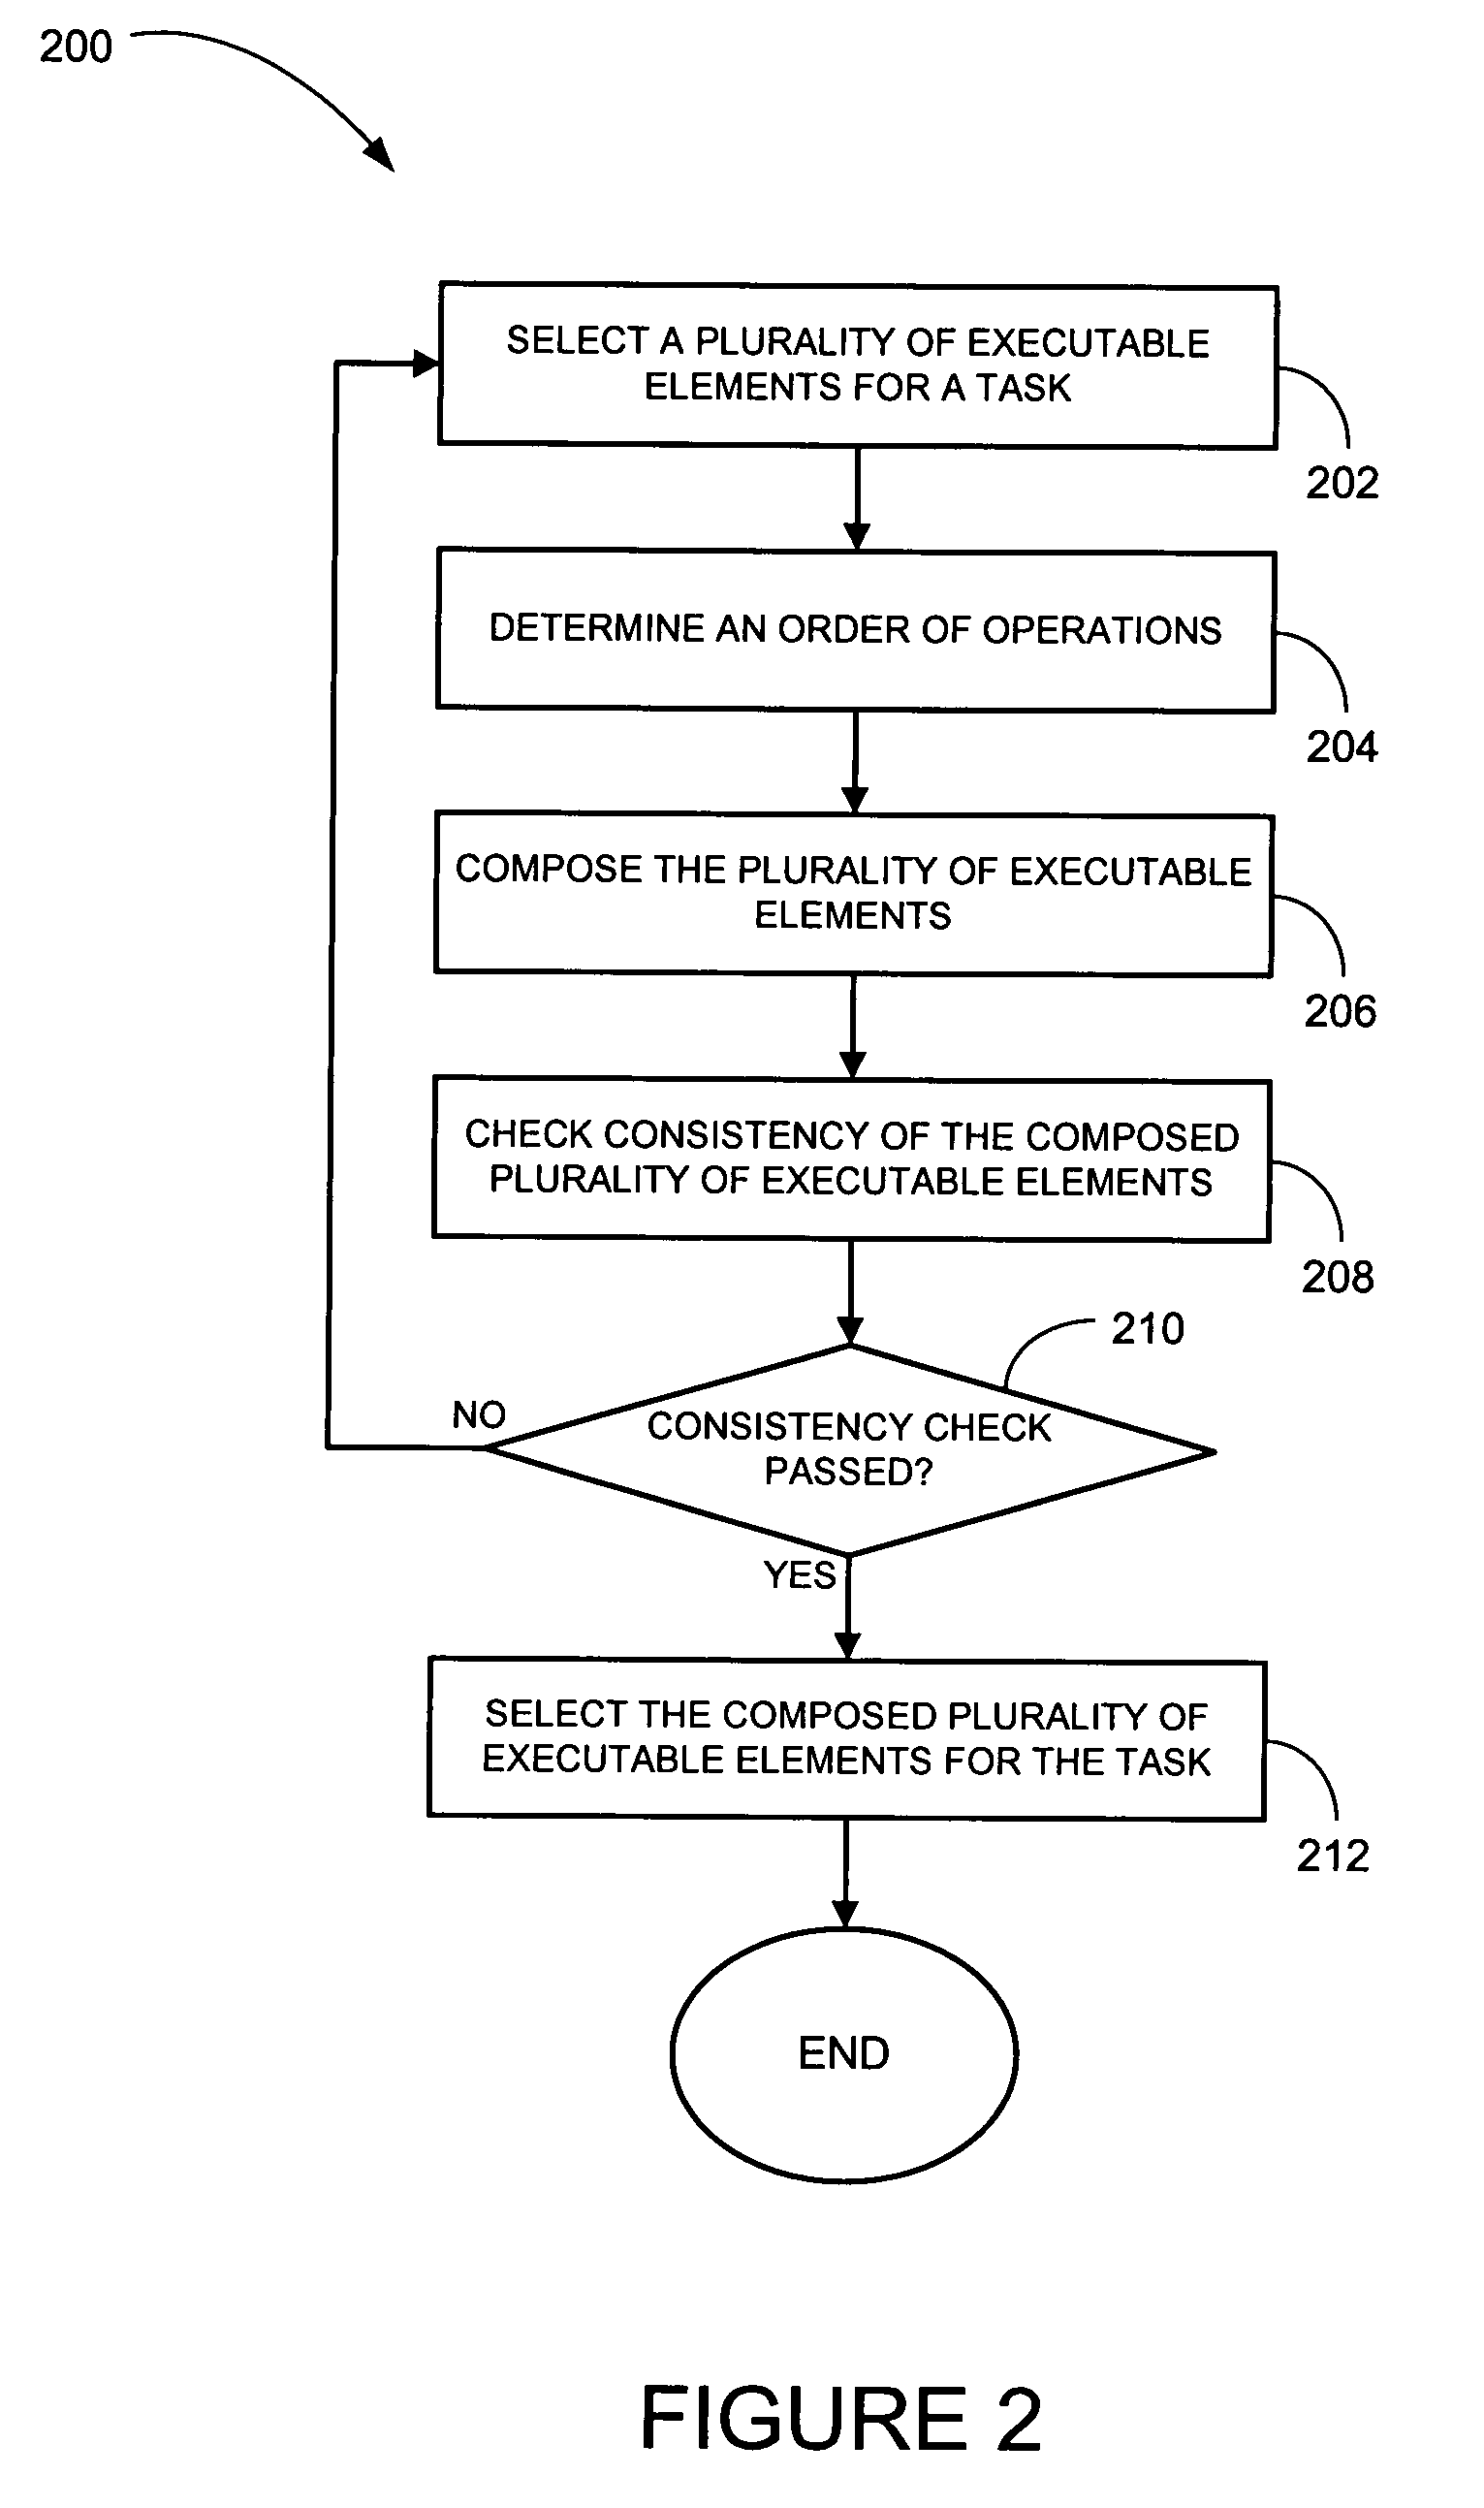 Method and system for process composition